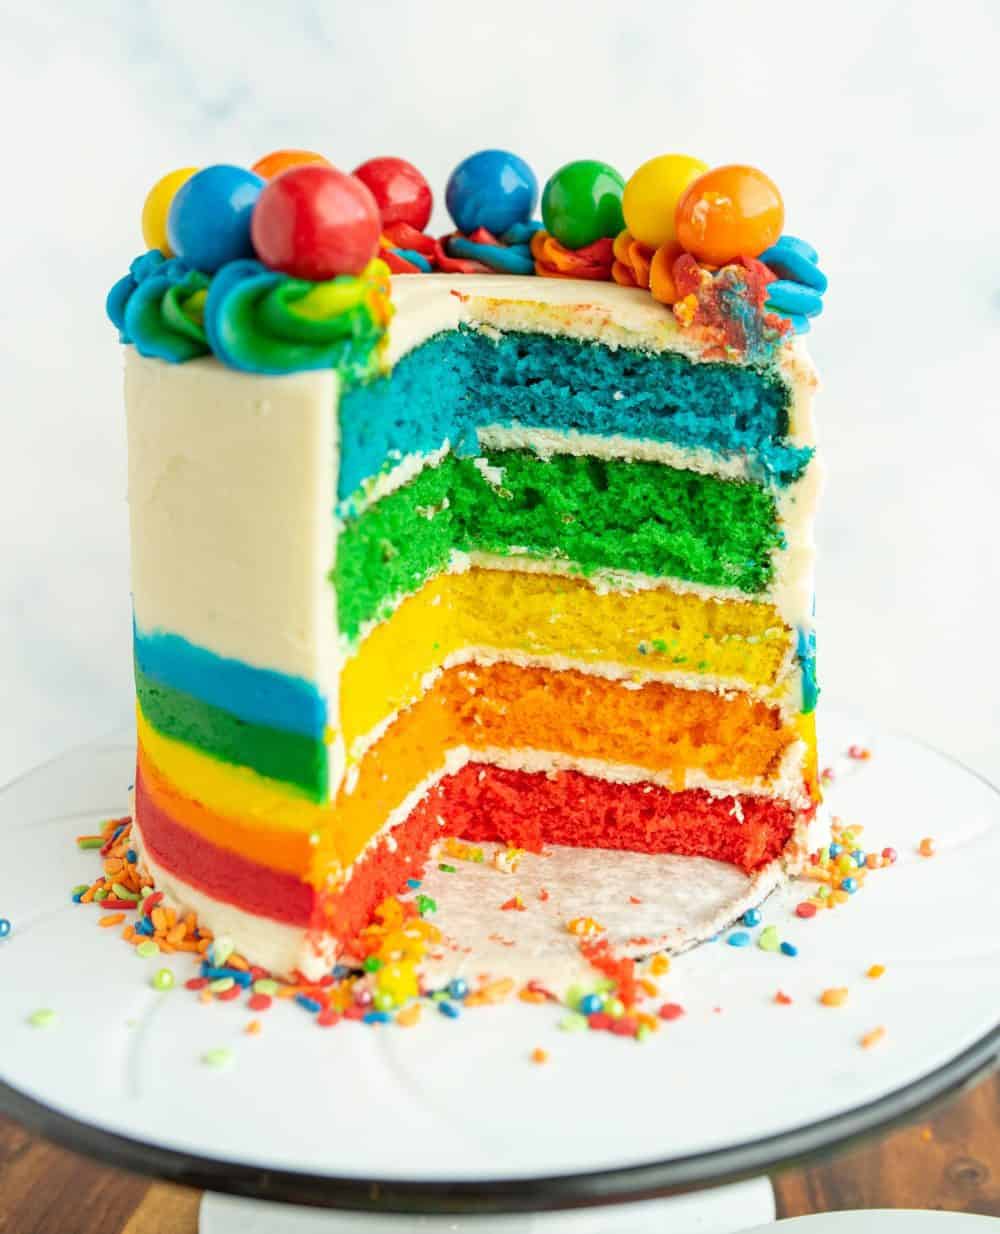 Rainbow Cake Recipe for St. Patrick's Day – Swans Down® Cake Flour